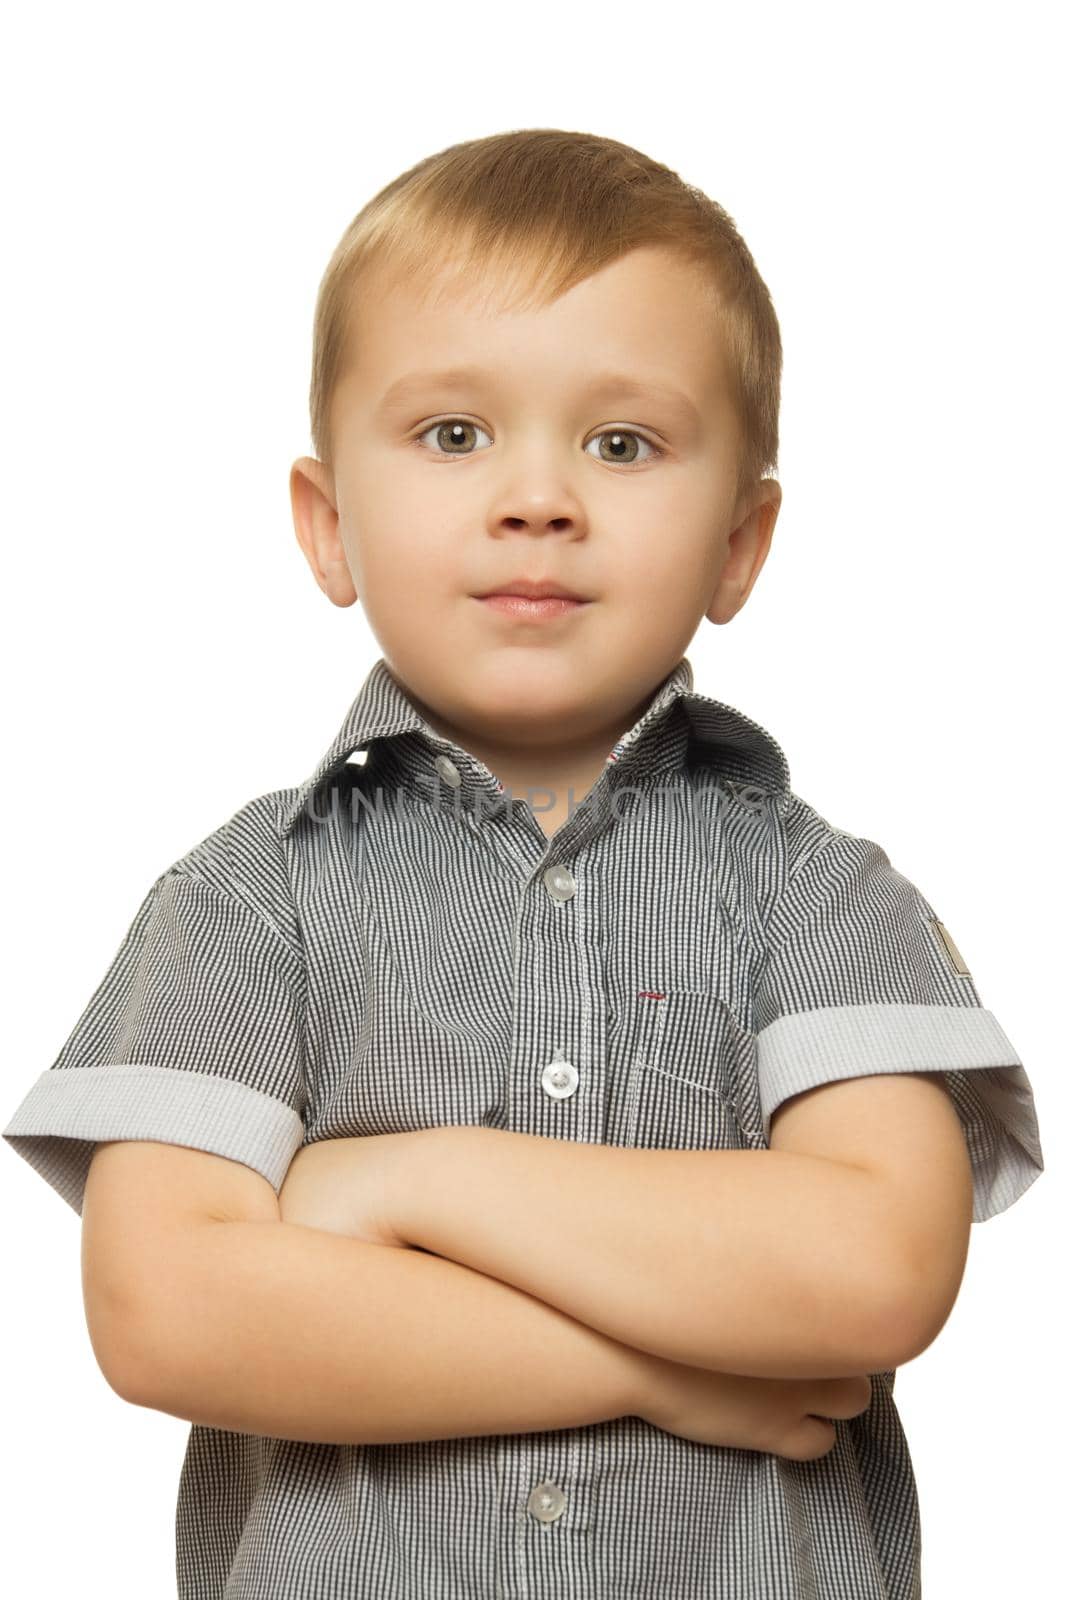 Cute little boy put his hands on his chest and looking directly at the camera. Close-up - Isolated on white background